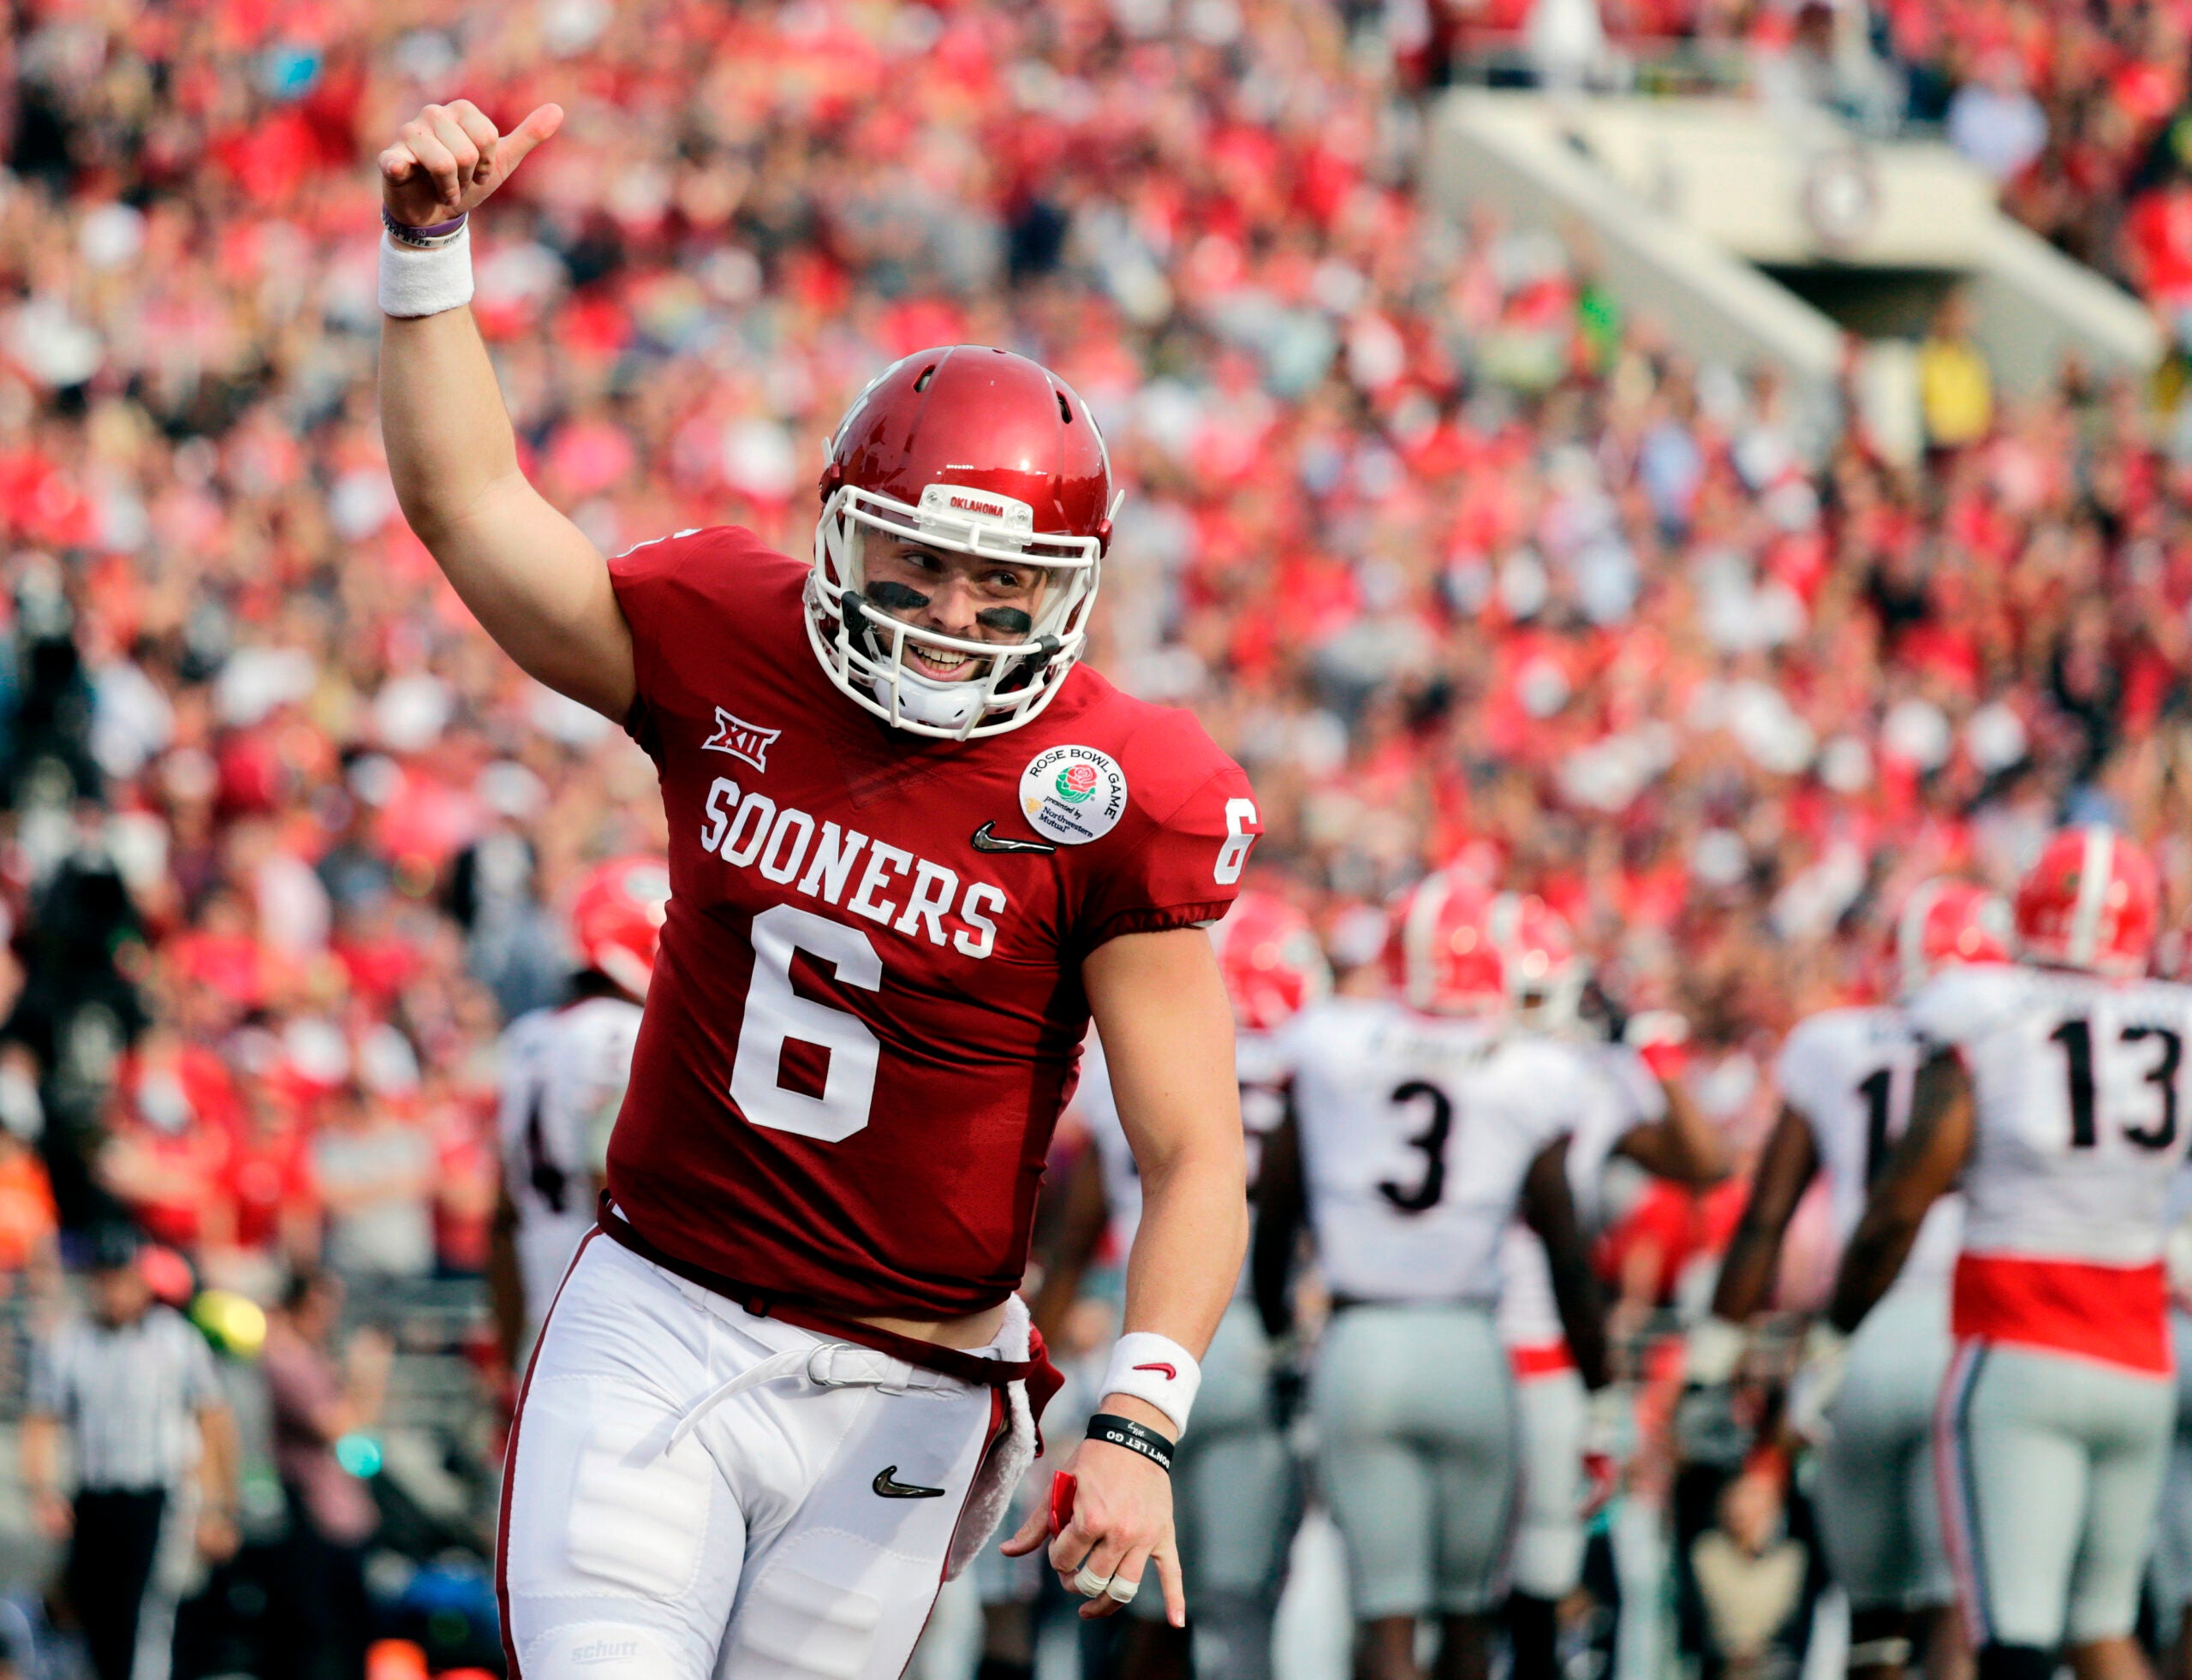 Four Sooners Selected in 2014 NFL Draft - University of Oklahoma